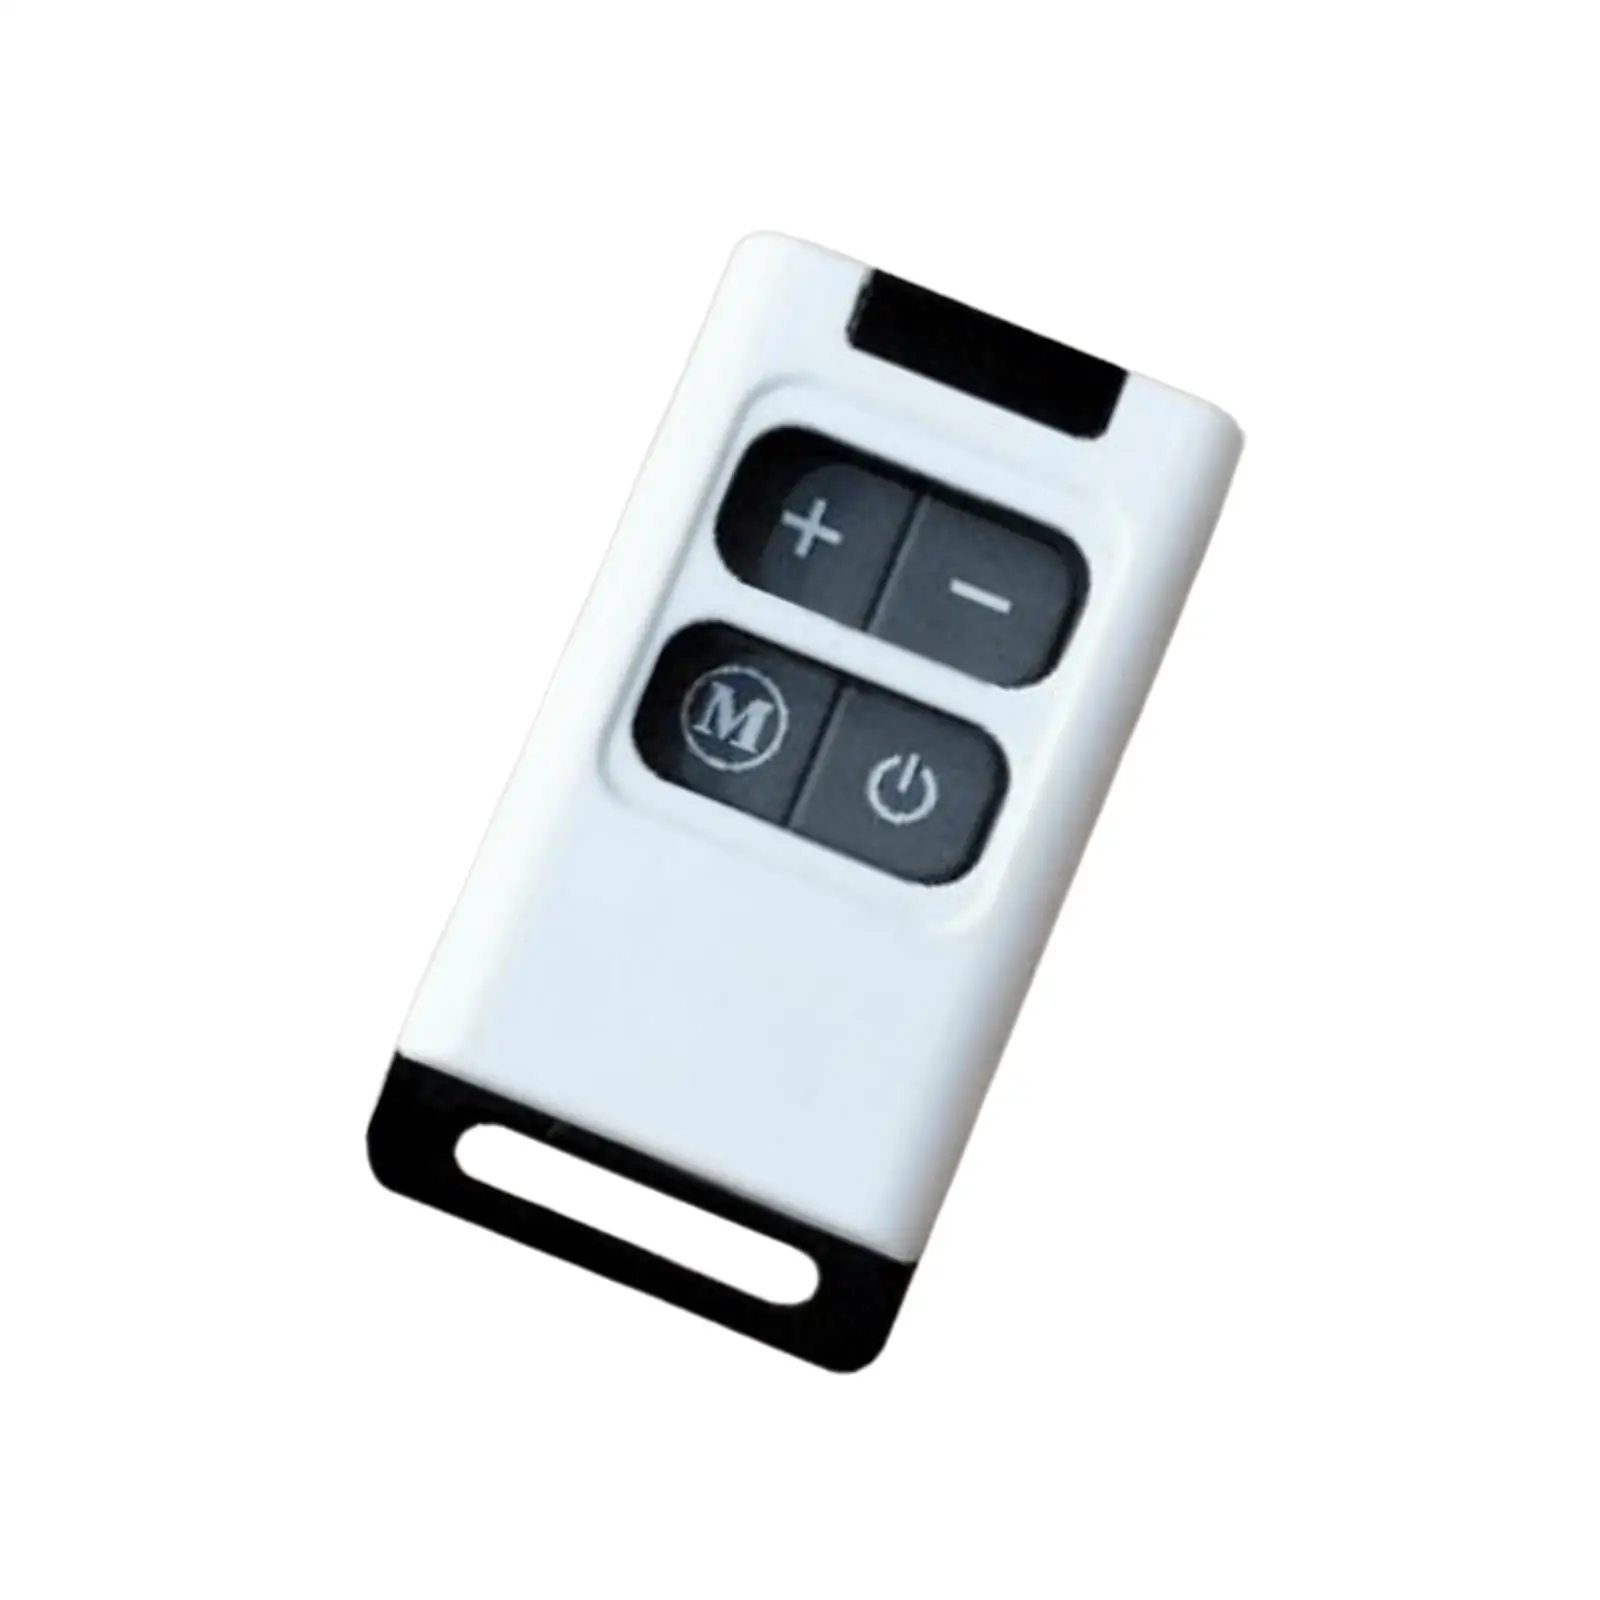 Car Parking Heater Remote Control Durable Car Heater for Boat Automotive Motorhomes Heater Controller Heating Accessories